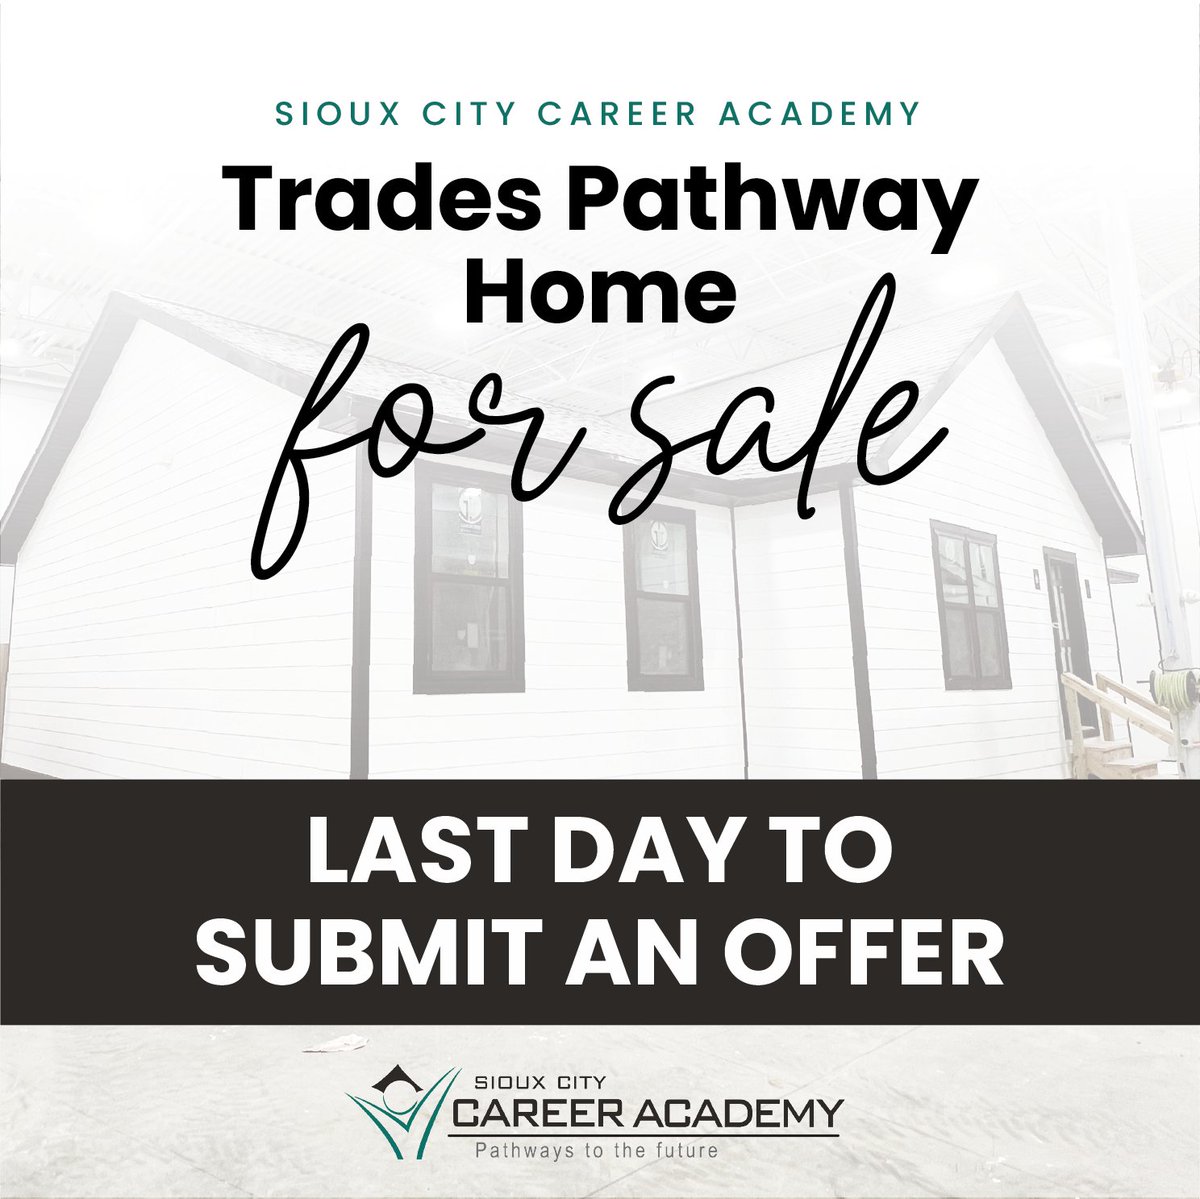 Today is the LAST day to submit an offer on the first-ever Sioux City Career Academy trades pathway home. Interested buyers may submit formal via siouxcityschools.org. Learn more about the offer process here: bit.ly/2023-24-trades….